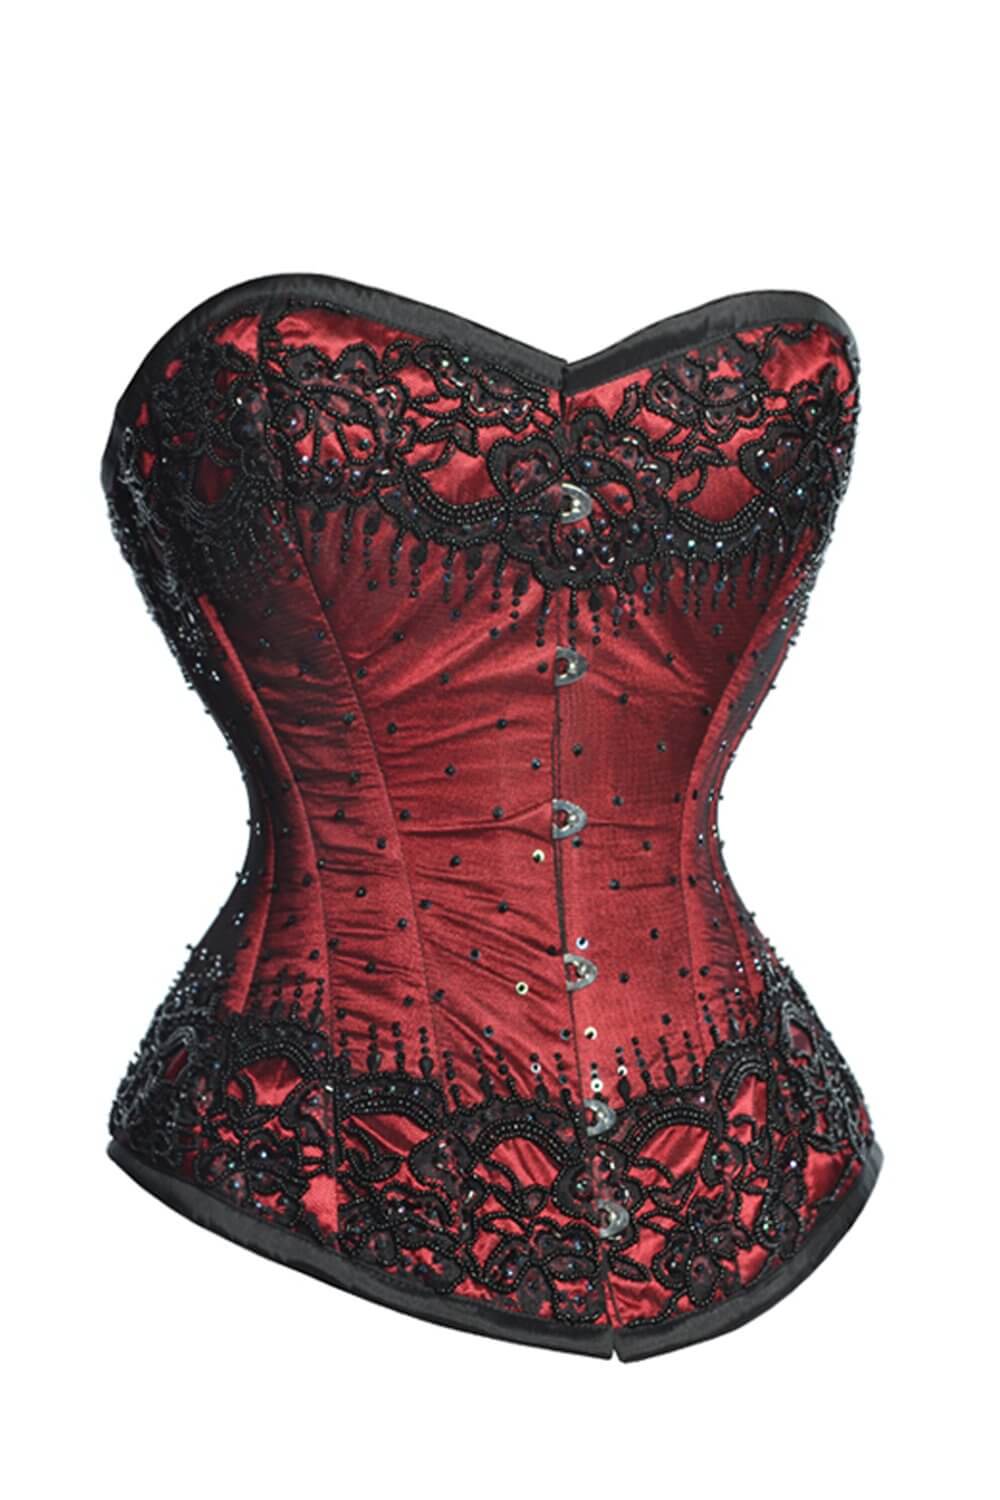  Overbust Corset Red Satin Burlesque Authentic Steel Boned Waist  Trainer Bustier Costume (3X-Small): Clothing, Shoes & Jewelry